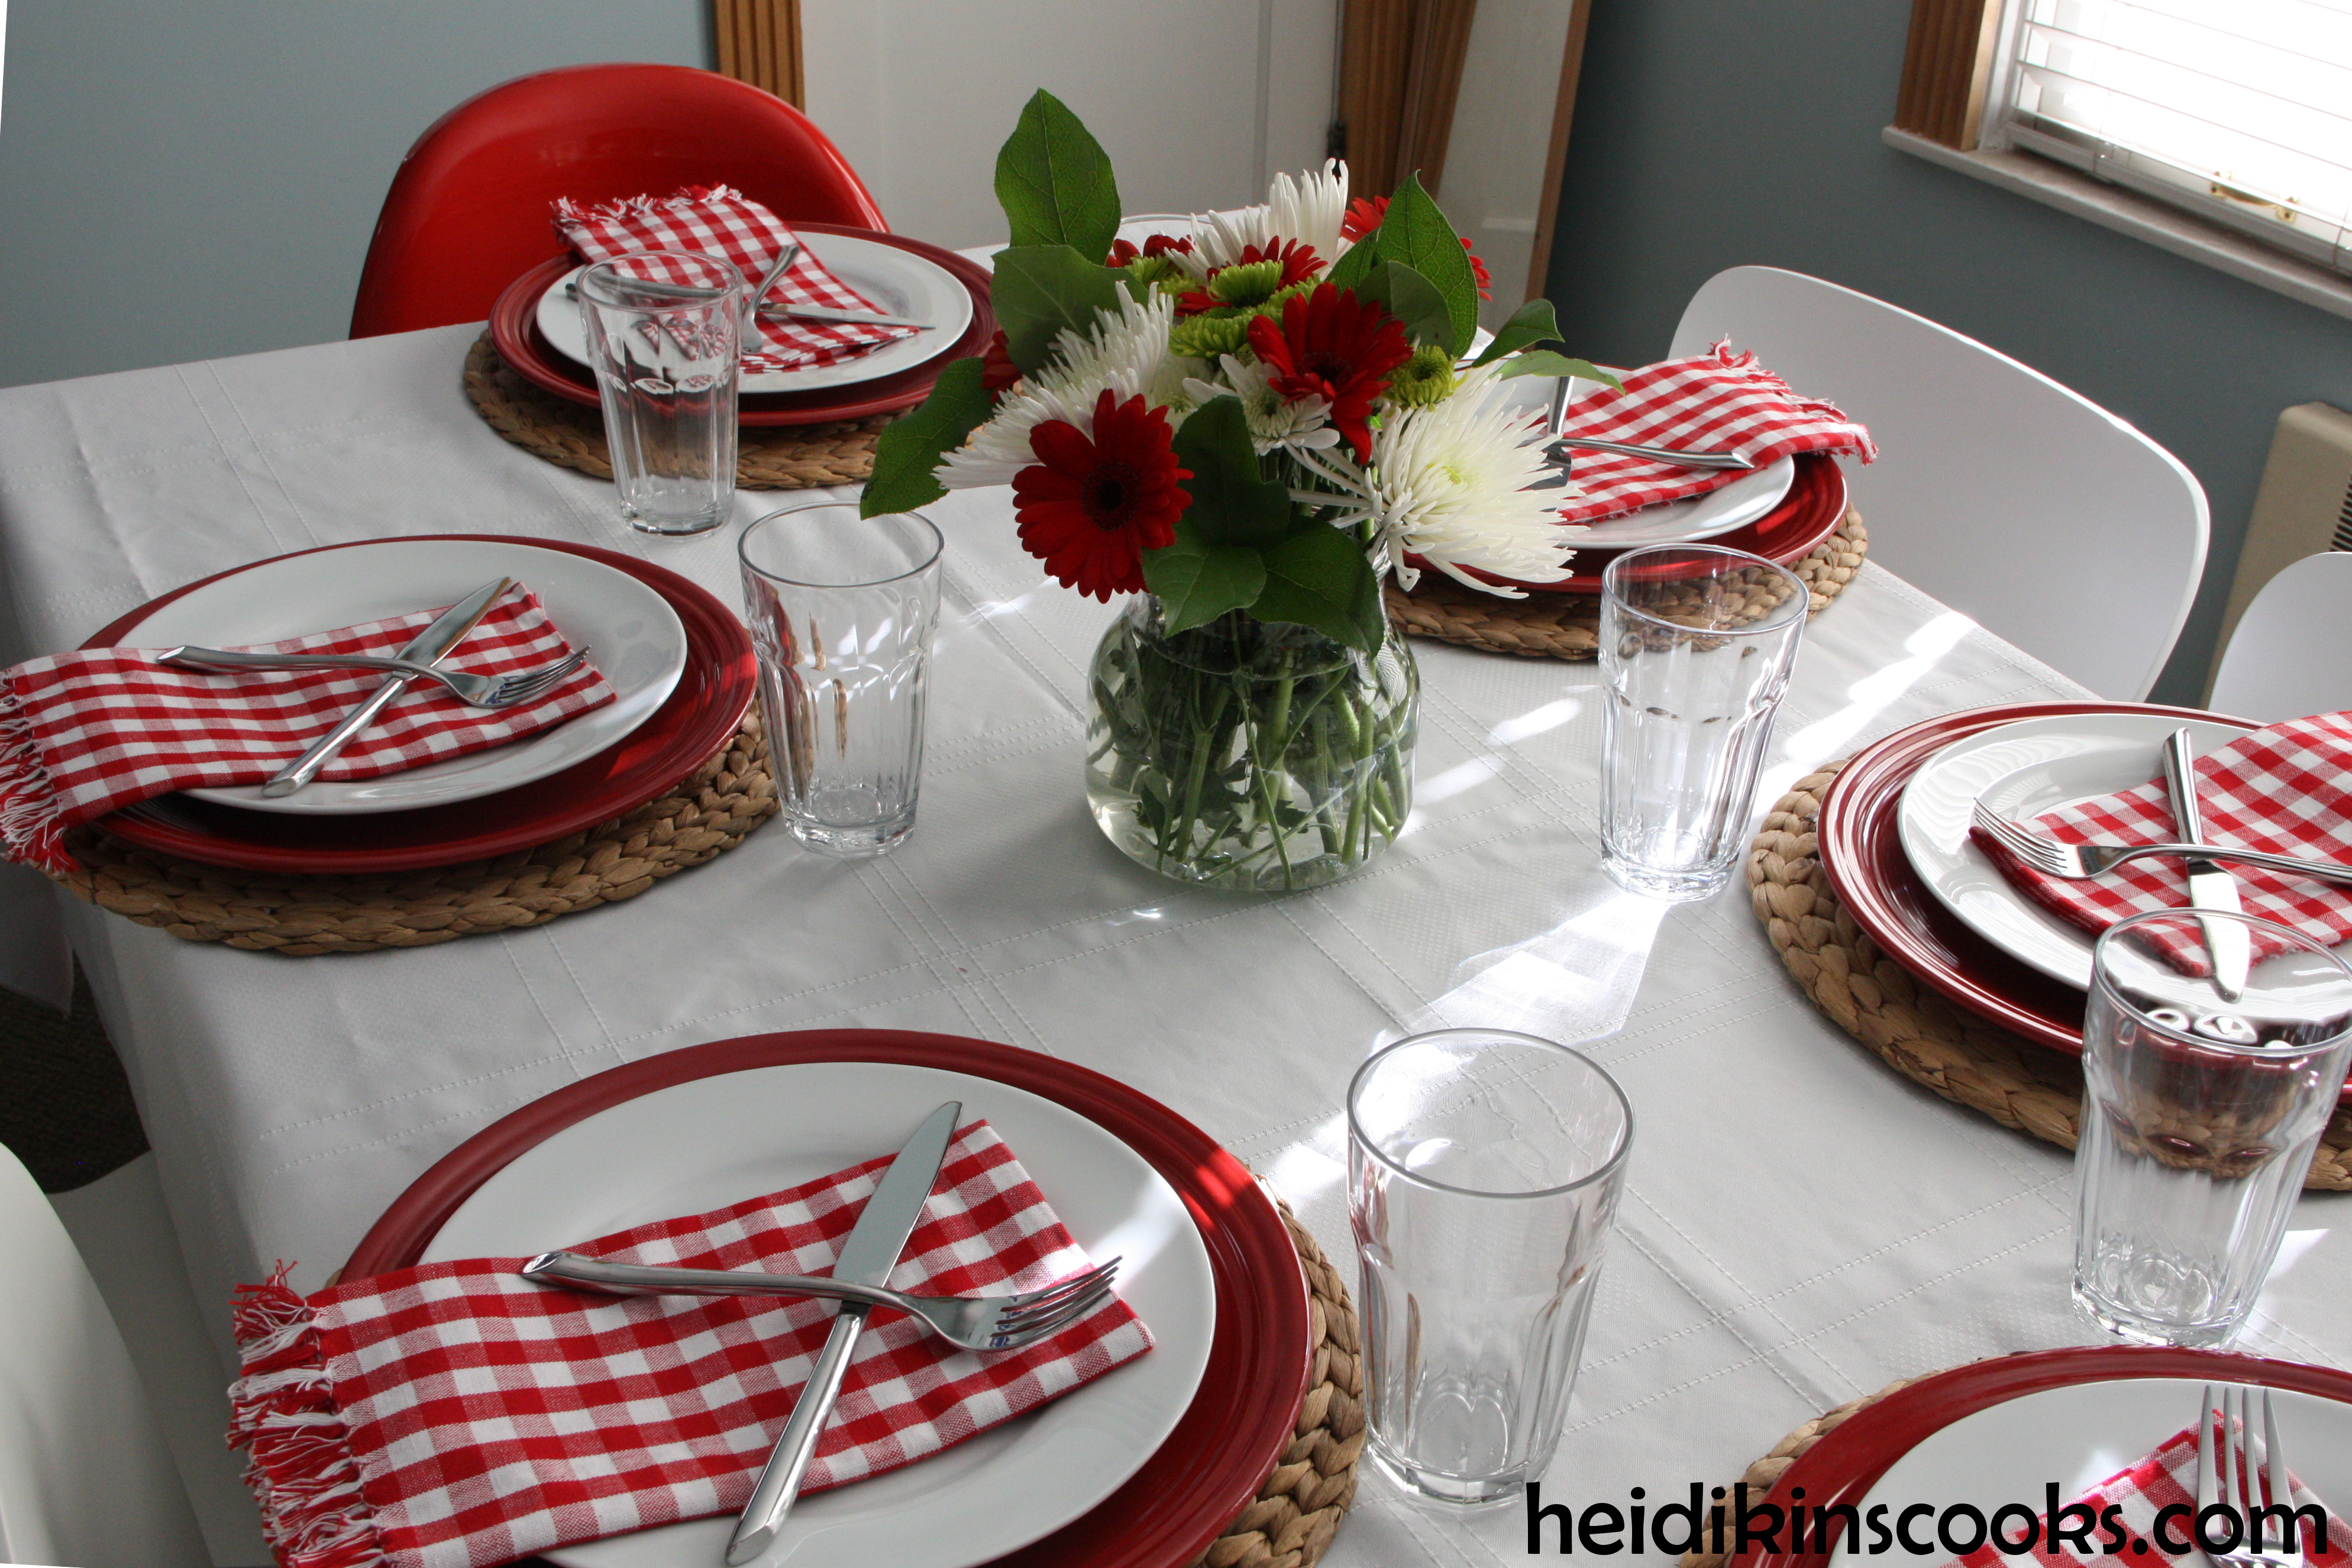 Casual Valentine’s Day Table Setting | heidikins cooks